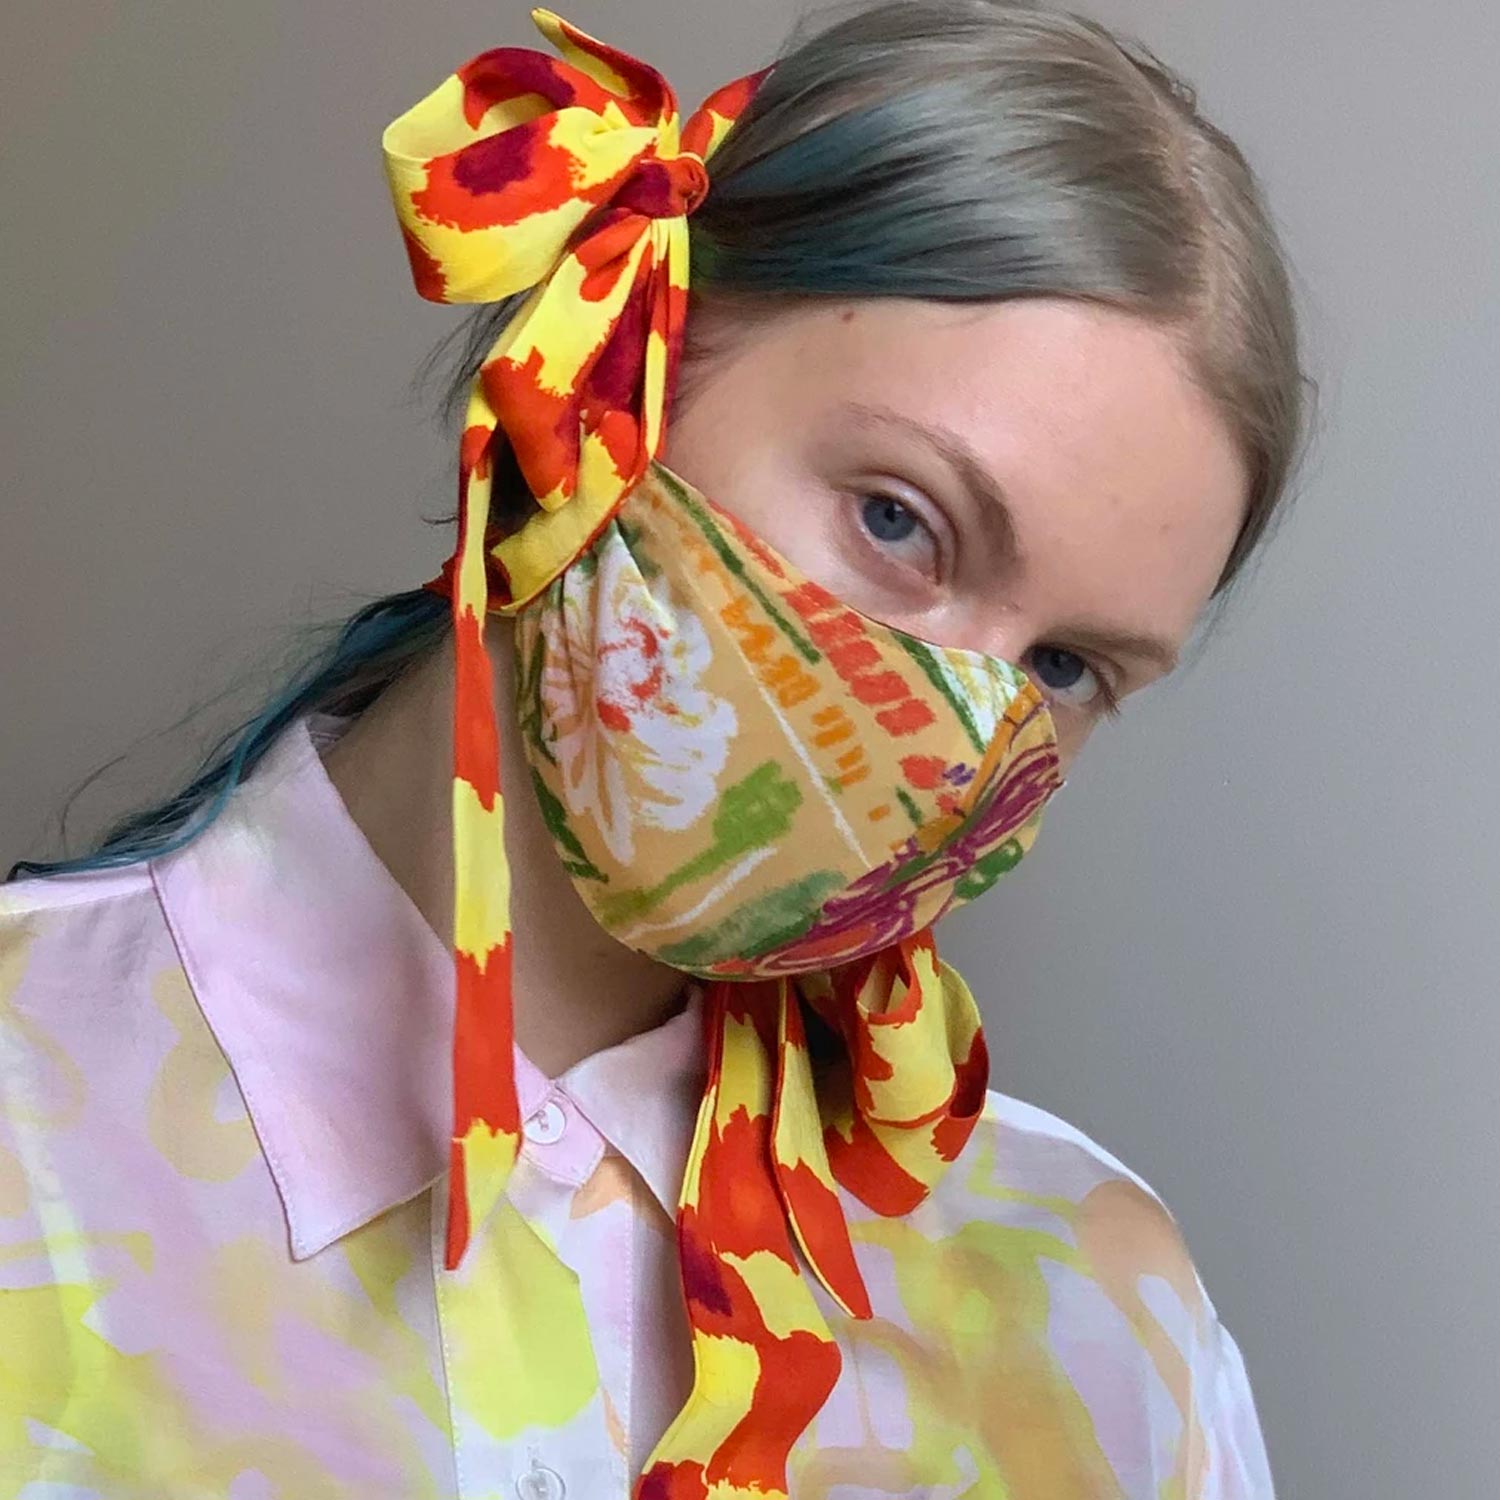 A model with blue hair wears a colorfully patterned face mask with large bows that loop around her head.